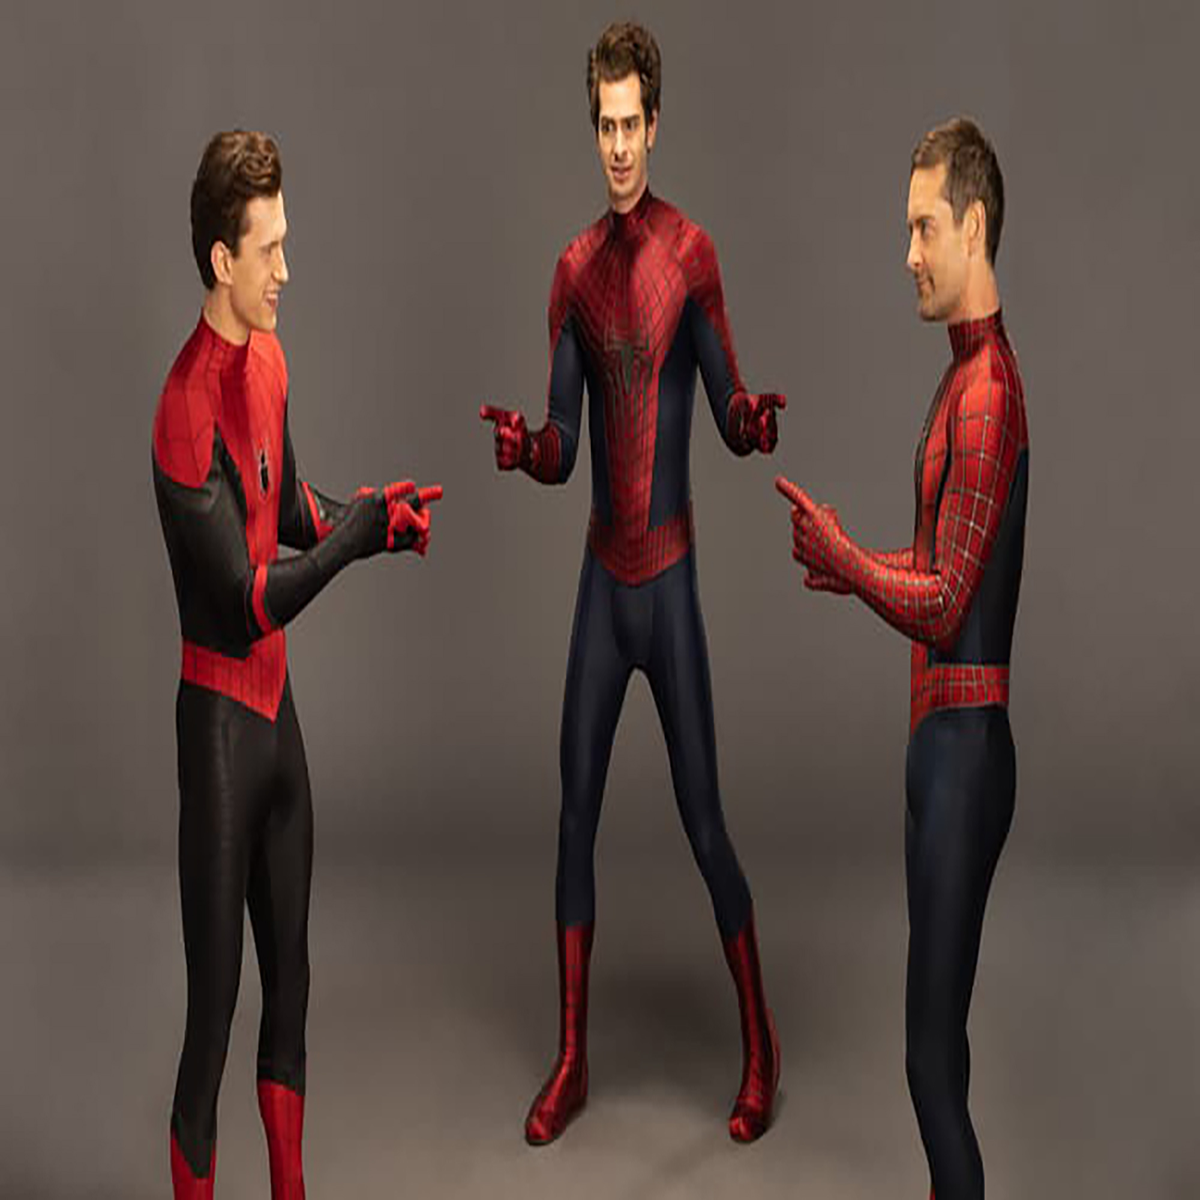 Spider-Man Across the Spider-Verse Characters Png, Spider Ma - Inspire  Uplift